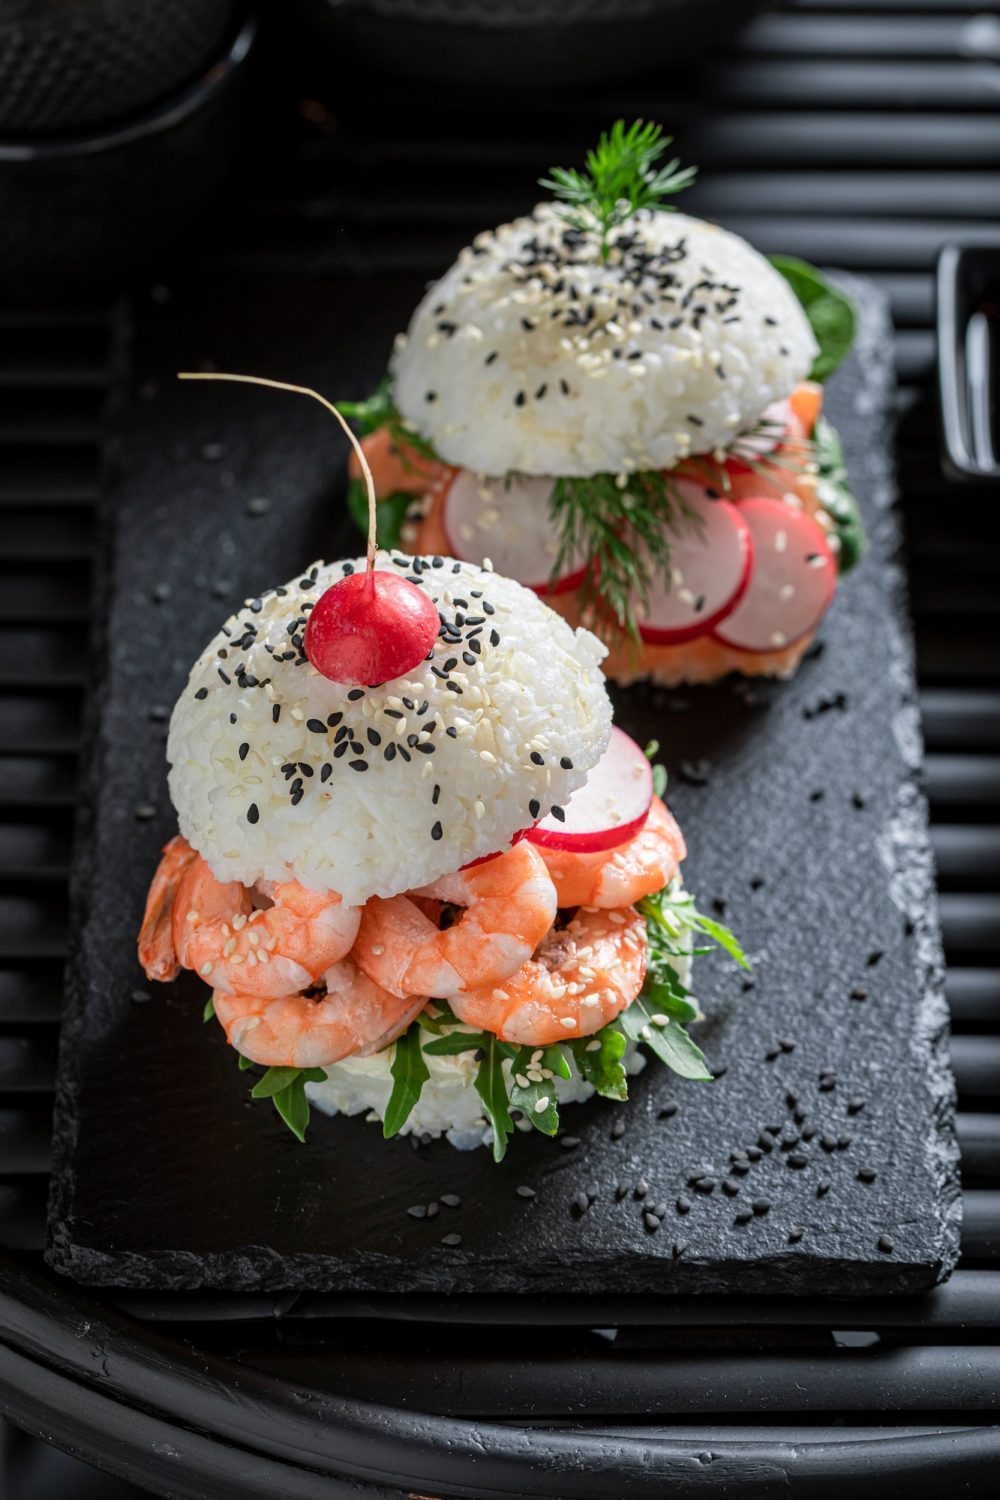 Healthy sush burger with seafood and vegetables as Japanese appetizers.